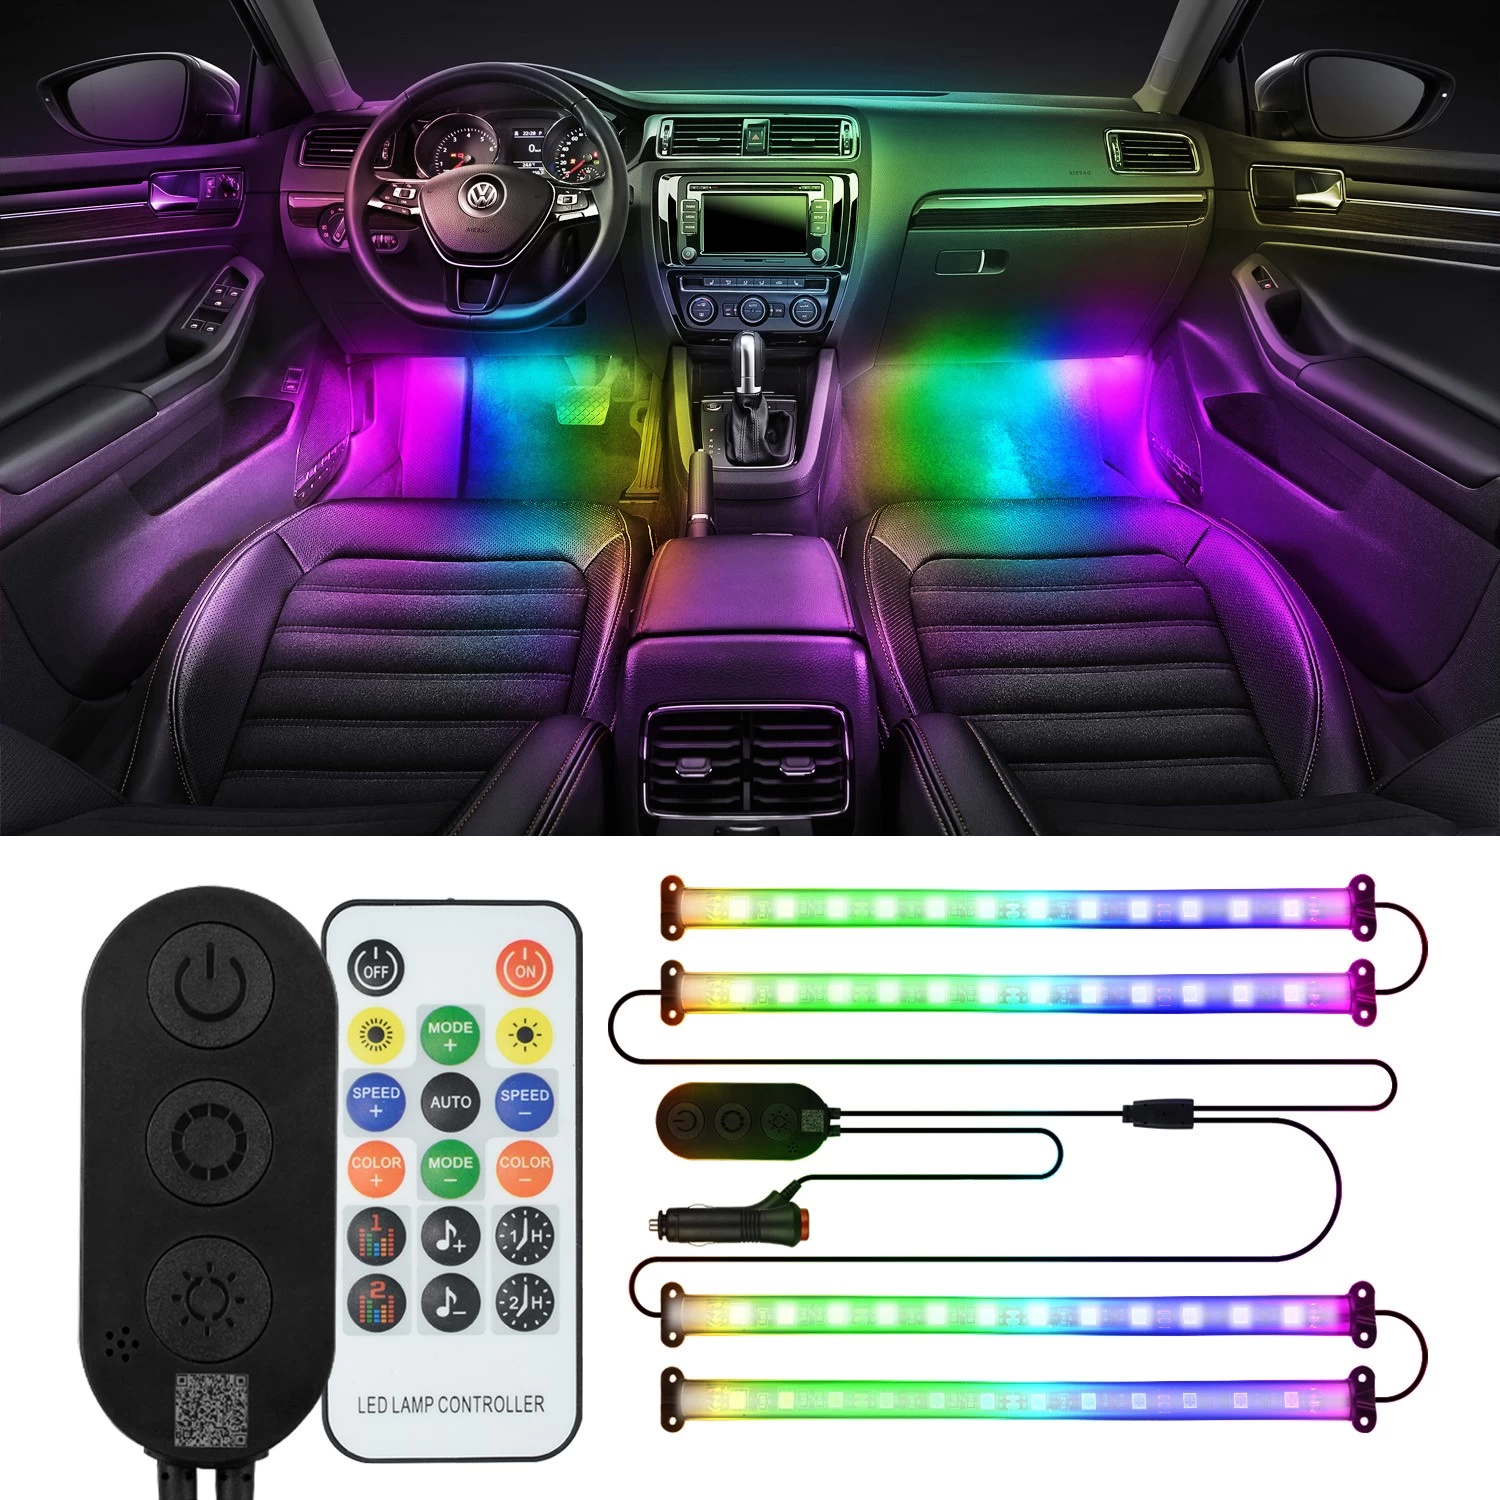 Unionlux Interior Car Lights,Car Accessories LED Lights for Car,Smart APP Control with Remote Control,Music Sync Color Change,16 Million Color car Decor with Car Charger 12V